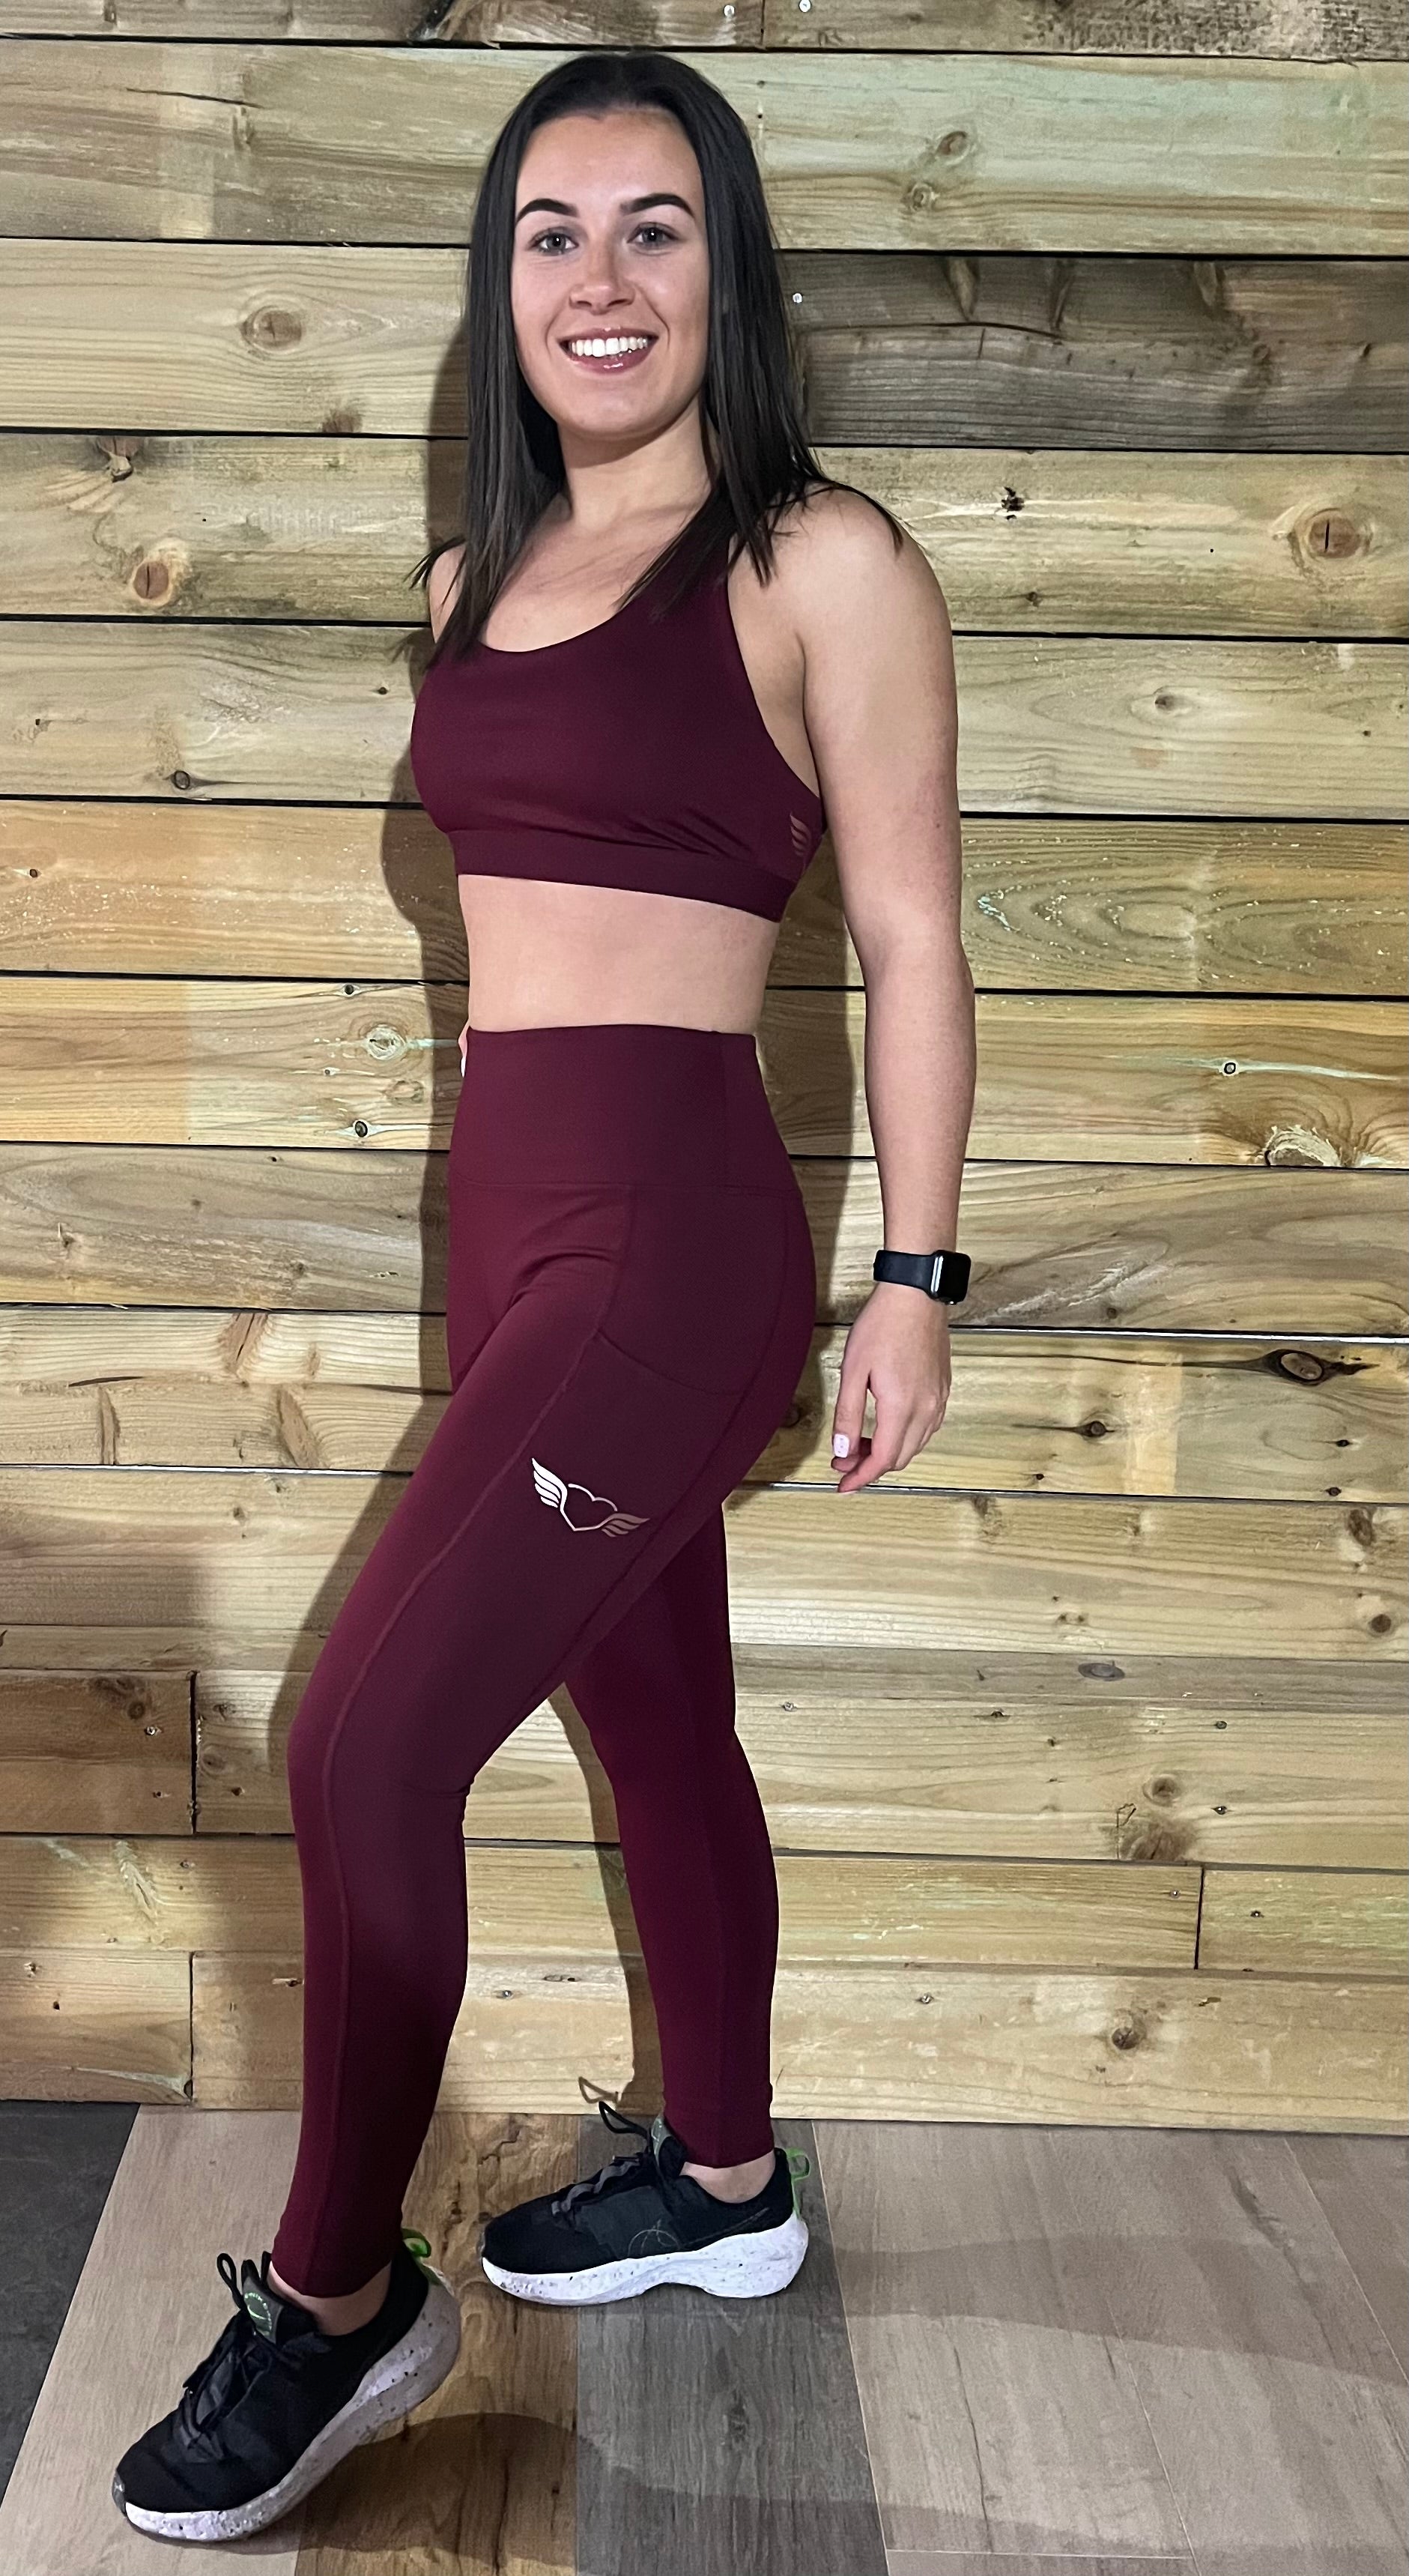 Burgundy sports bra (up to size 20) (matching leggings available